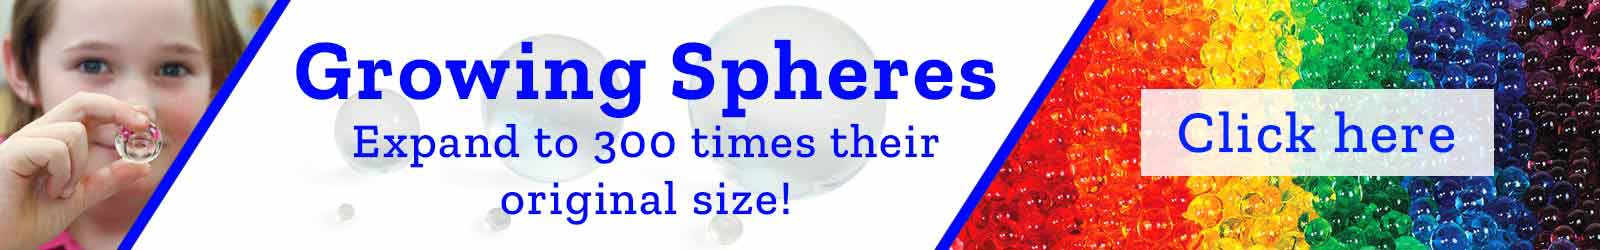 Growing Spheres Expand to 300 times their original size!